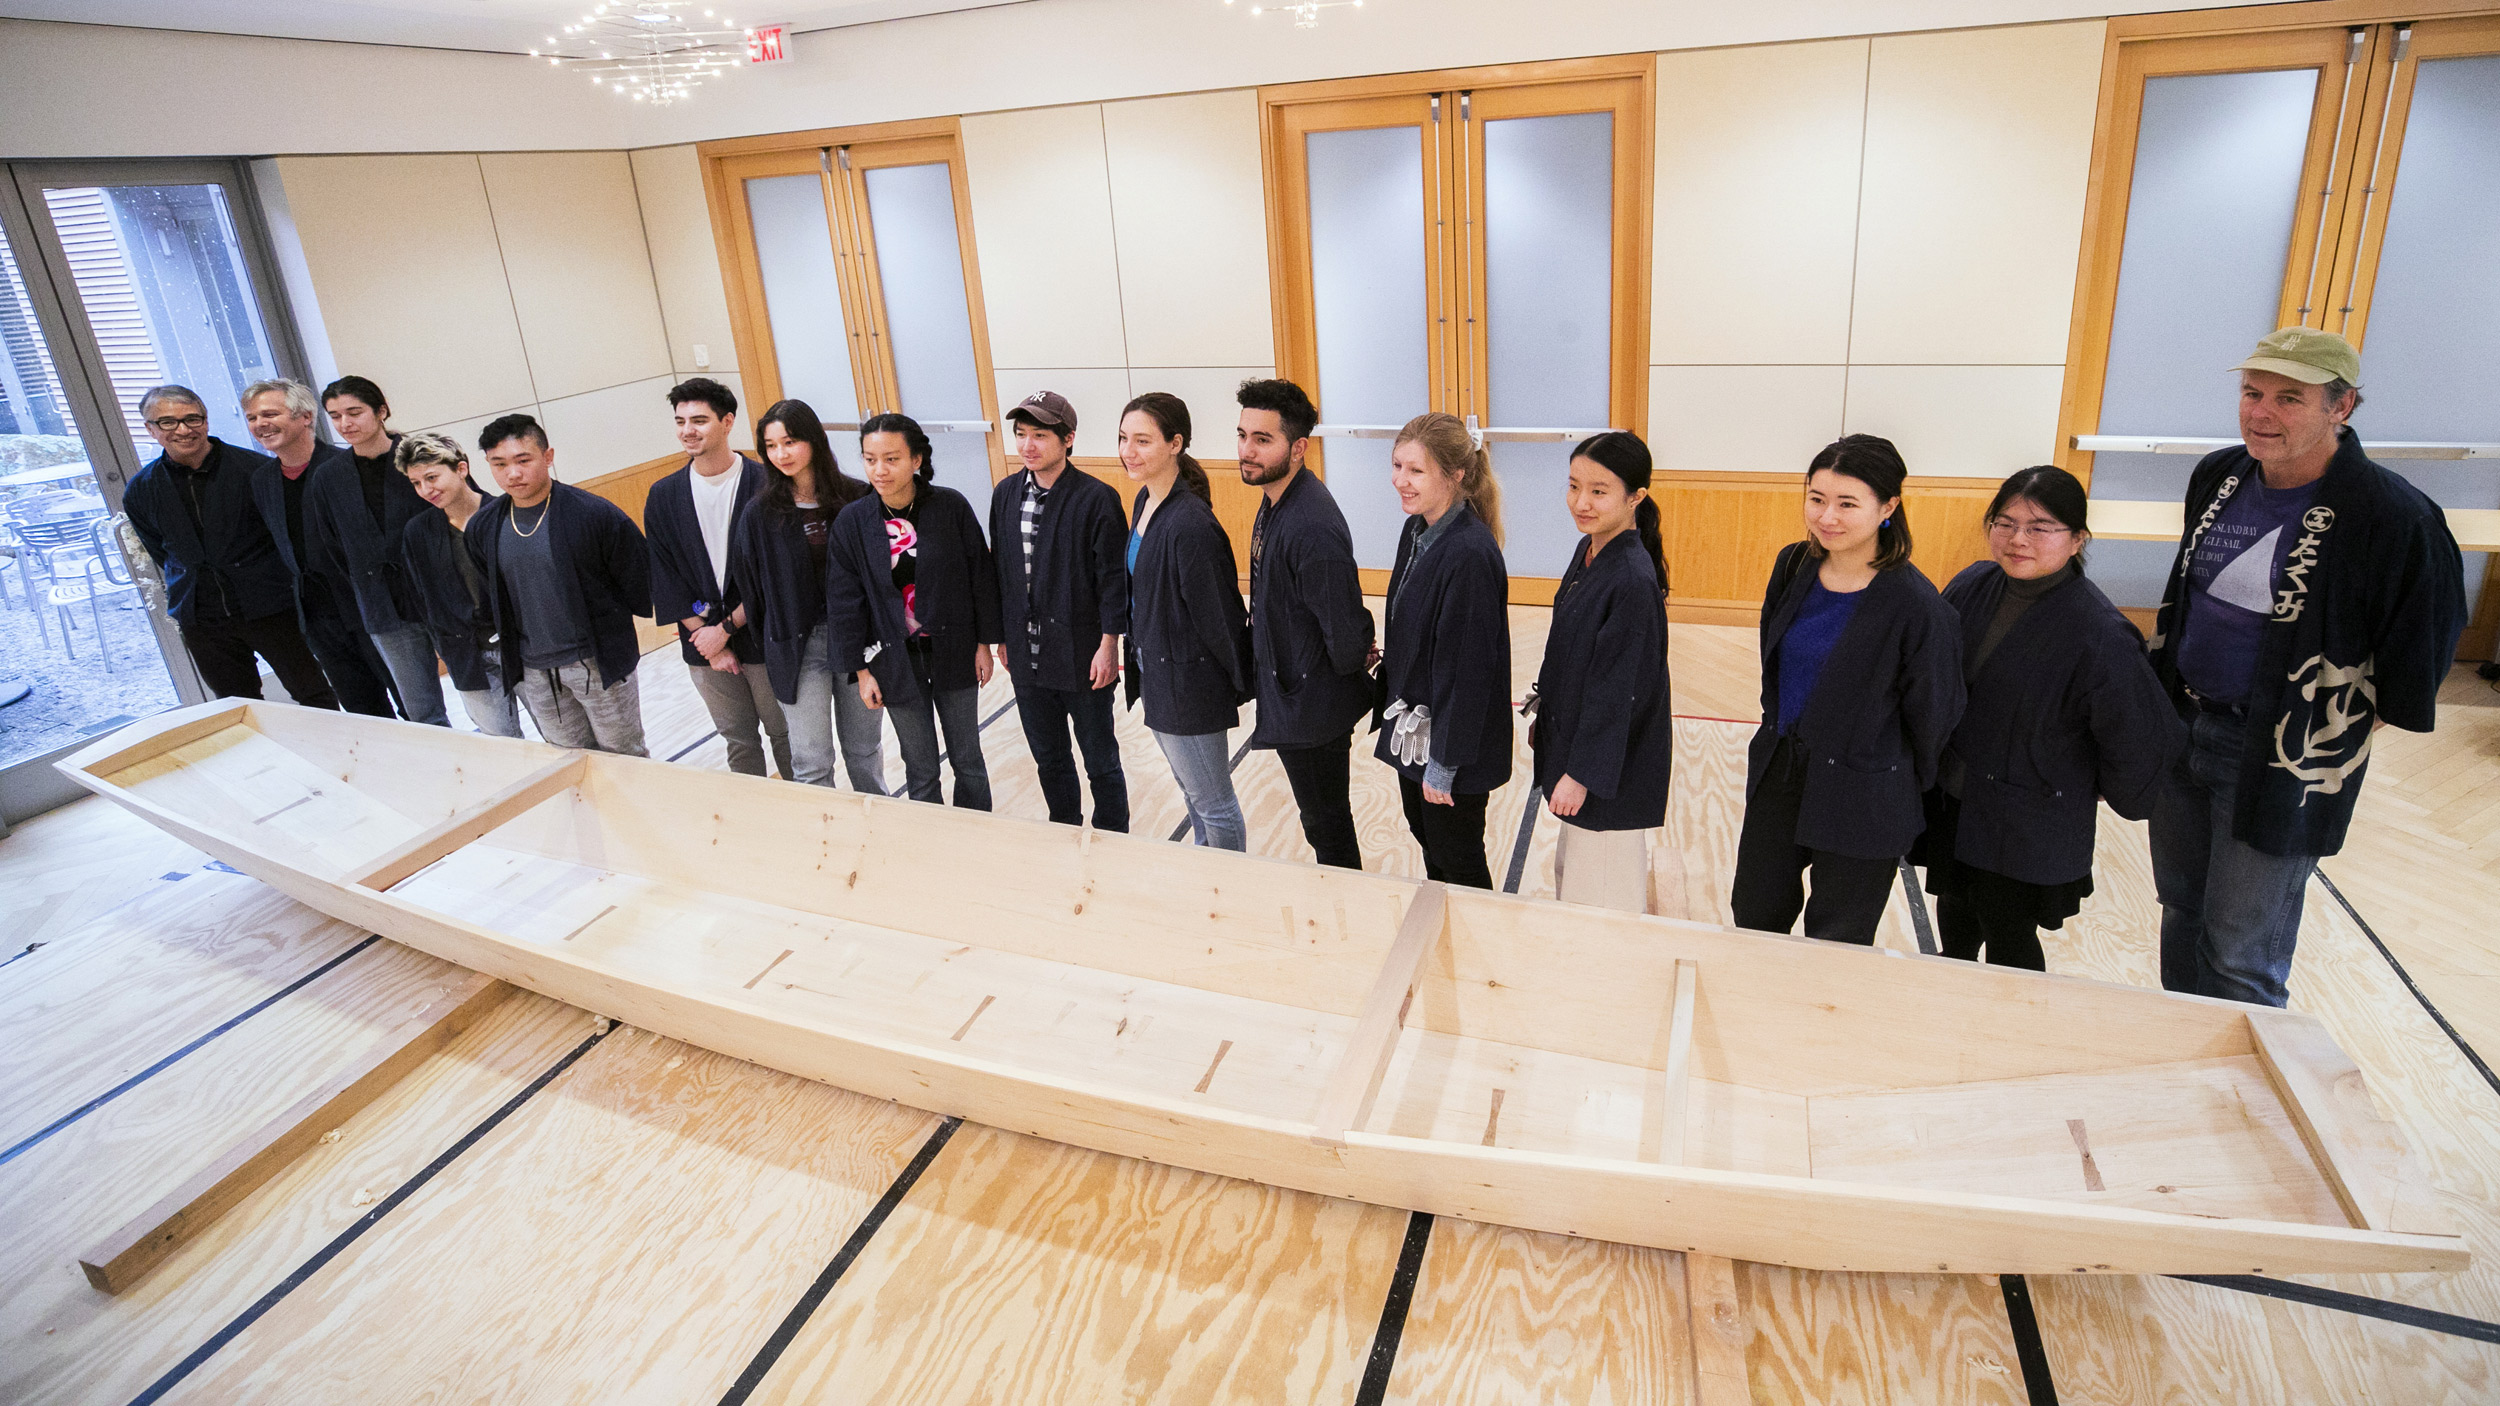 Students, Brooks, and members of the Reischauer Institute, who made the project possible, pose with the completed riverboat in the classroom workshop.